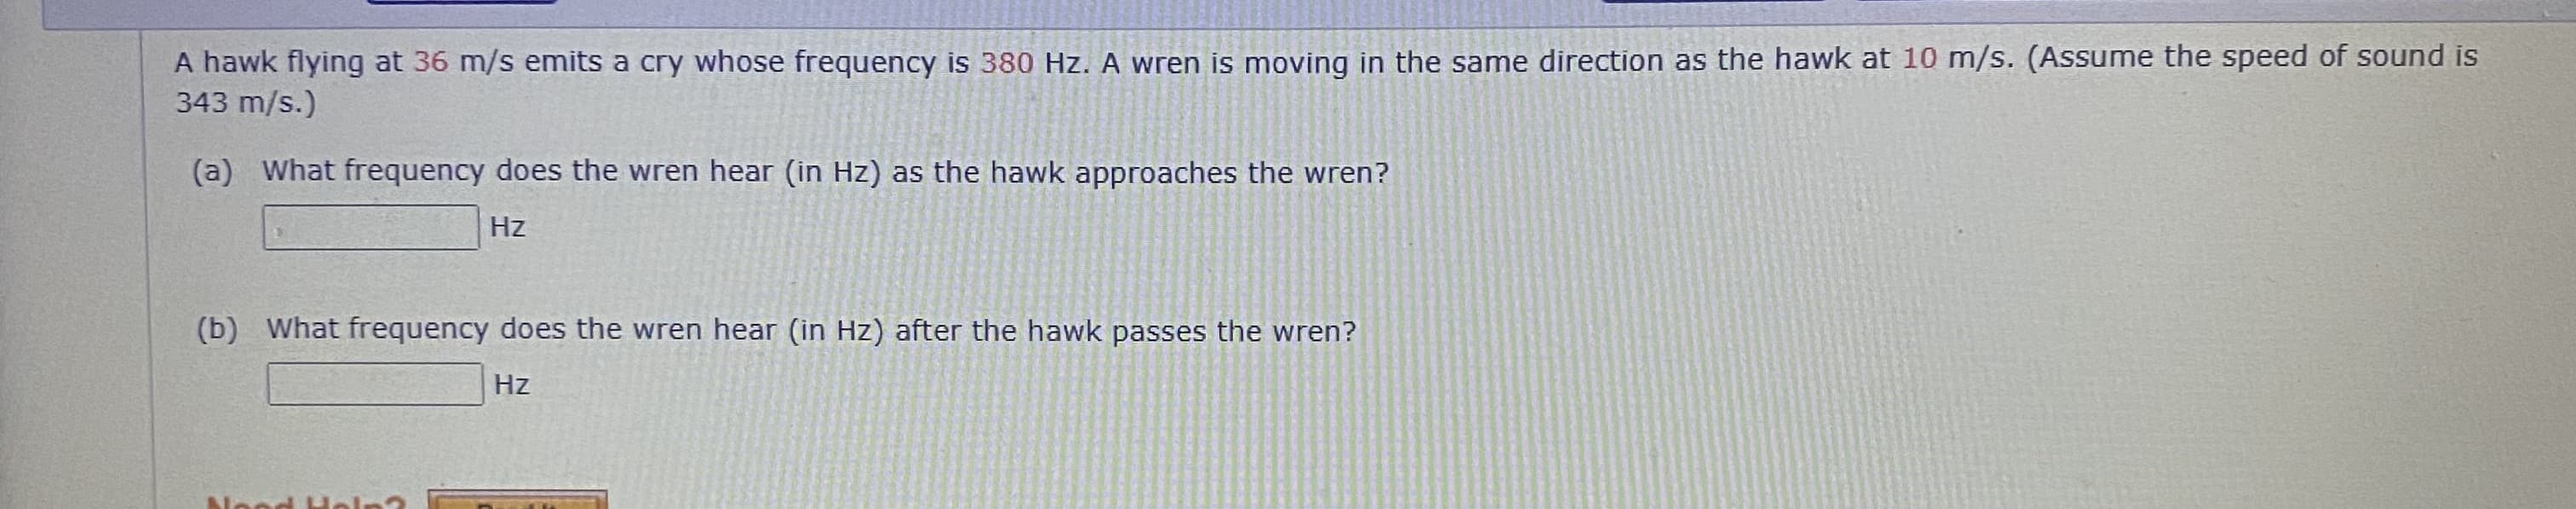 A hawk flying at 36 m/s emits a cry whose frequency is 380 Hz. A wren is moving in the same direction as the hawk at 10 m/s. (Assume the speed of sound is
343 m/s.)
(a) What frequency does the wren hear (in Hz) as the hawk approaches the wren?
Hz
(b) What frequency does the wren hear (in Hz) after the hawk passes the wren?
Hz
